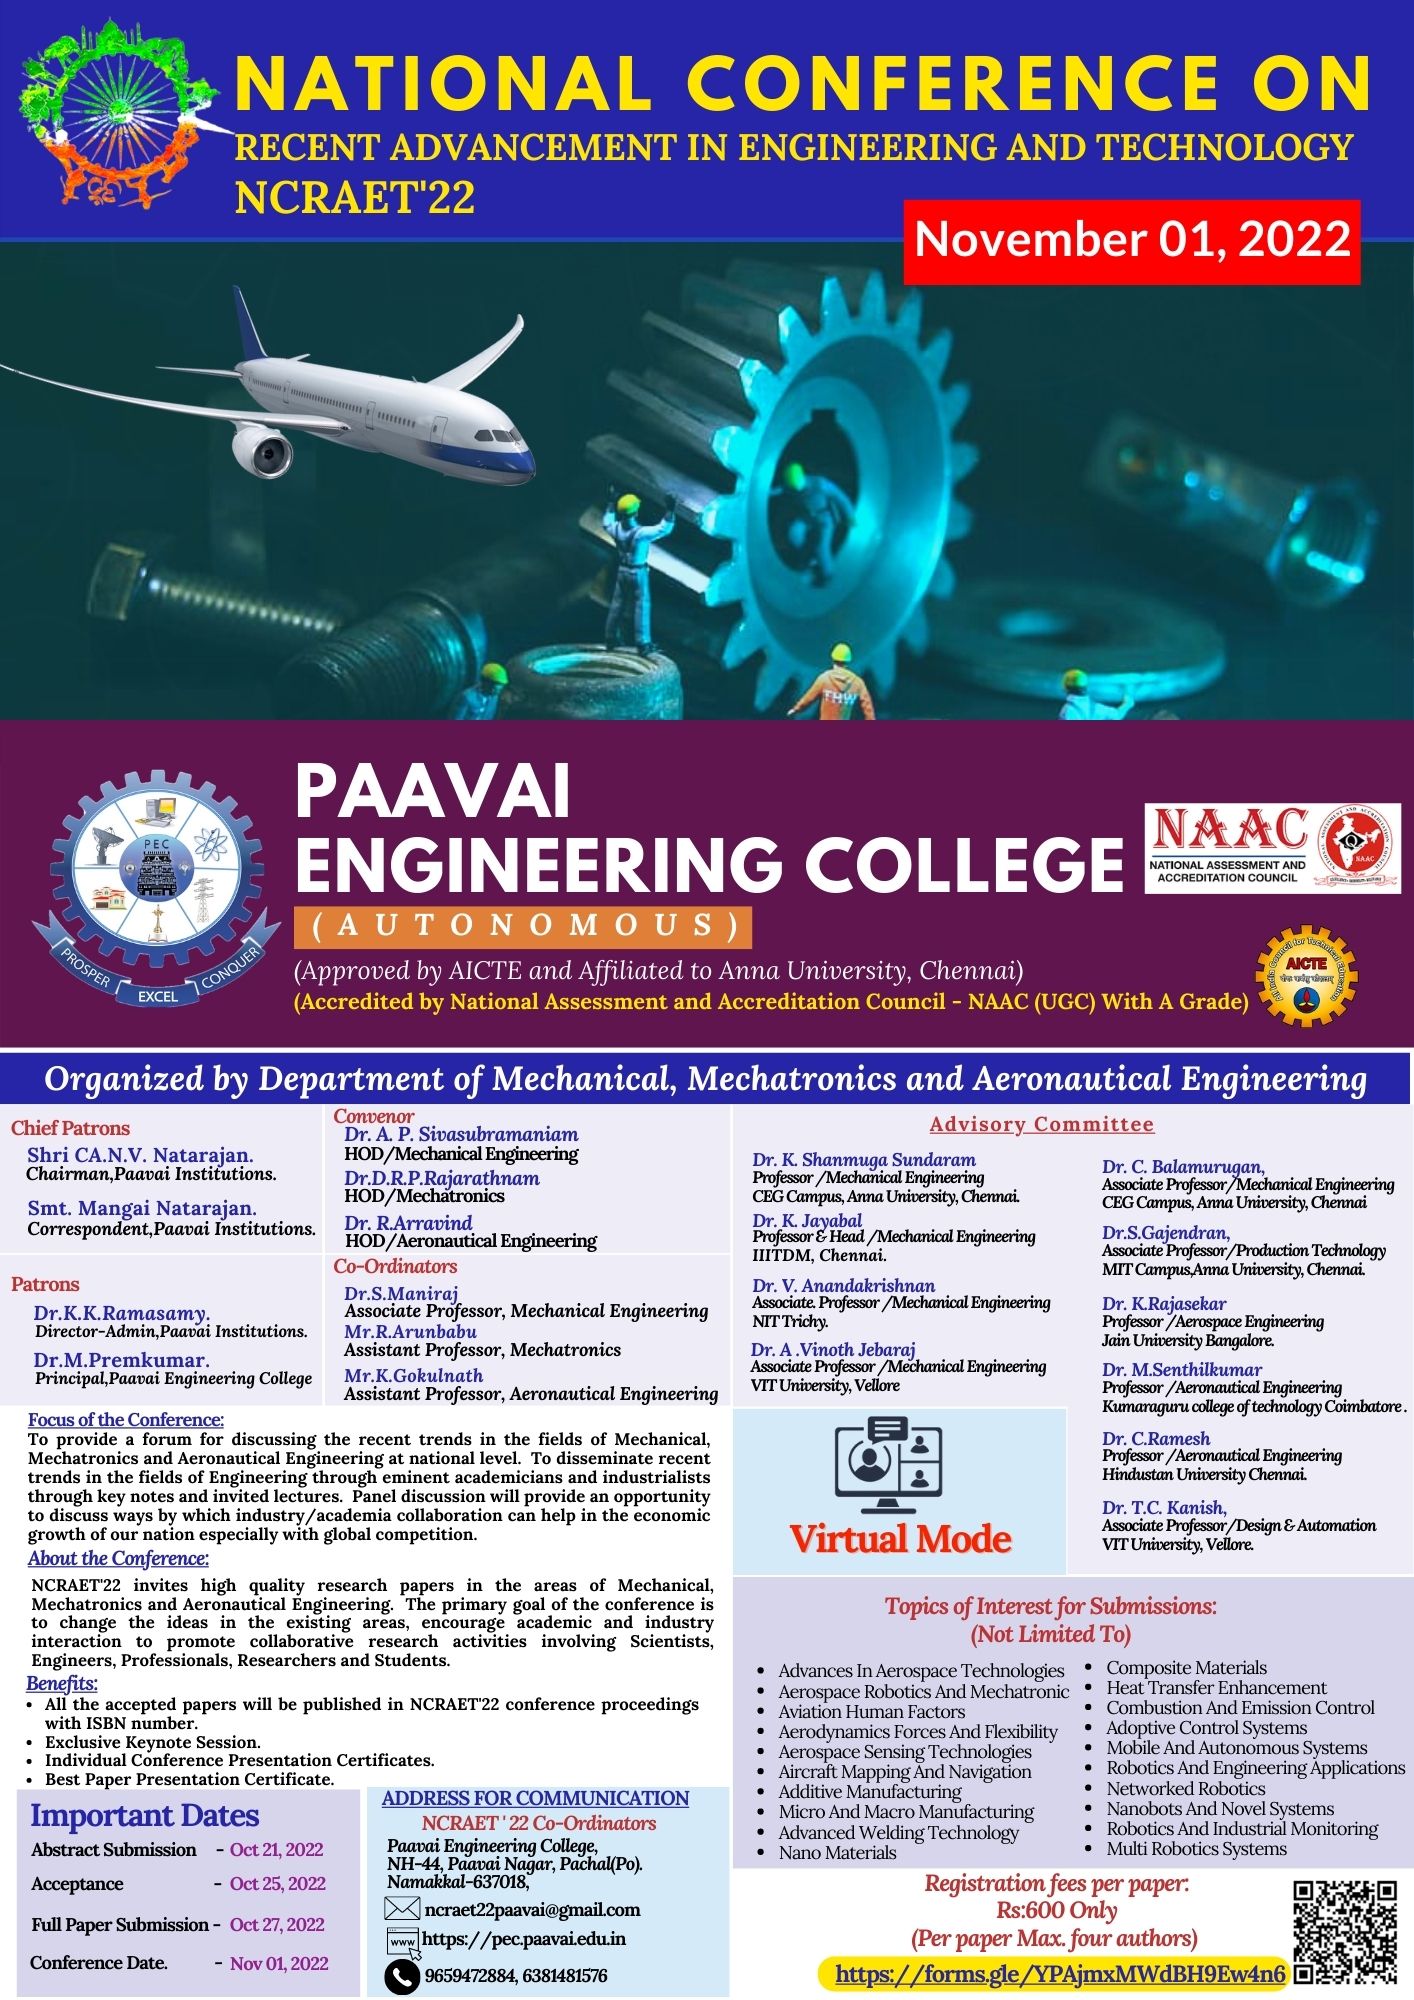 National Conference on Recent advancement in Engineering and Technology NCRAET 22